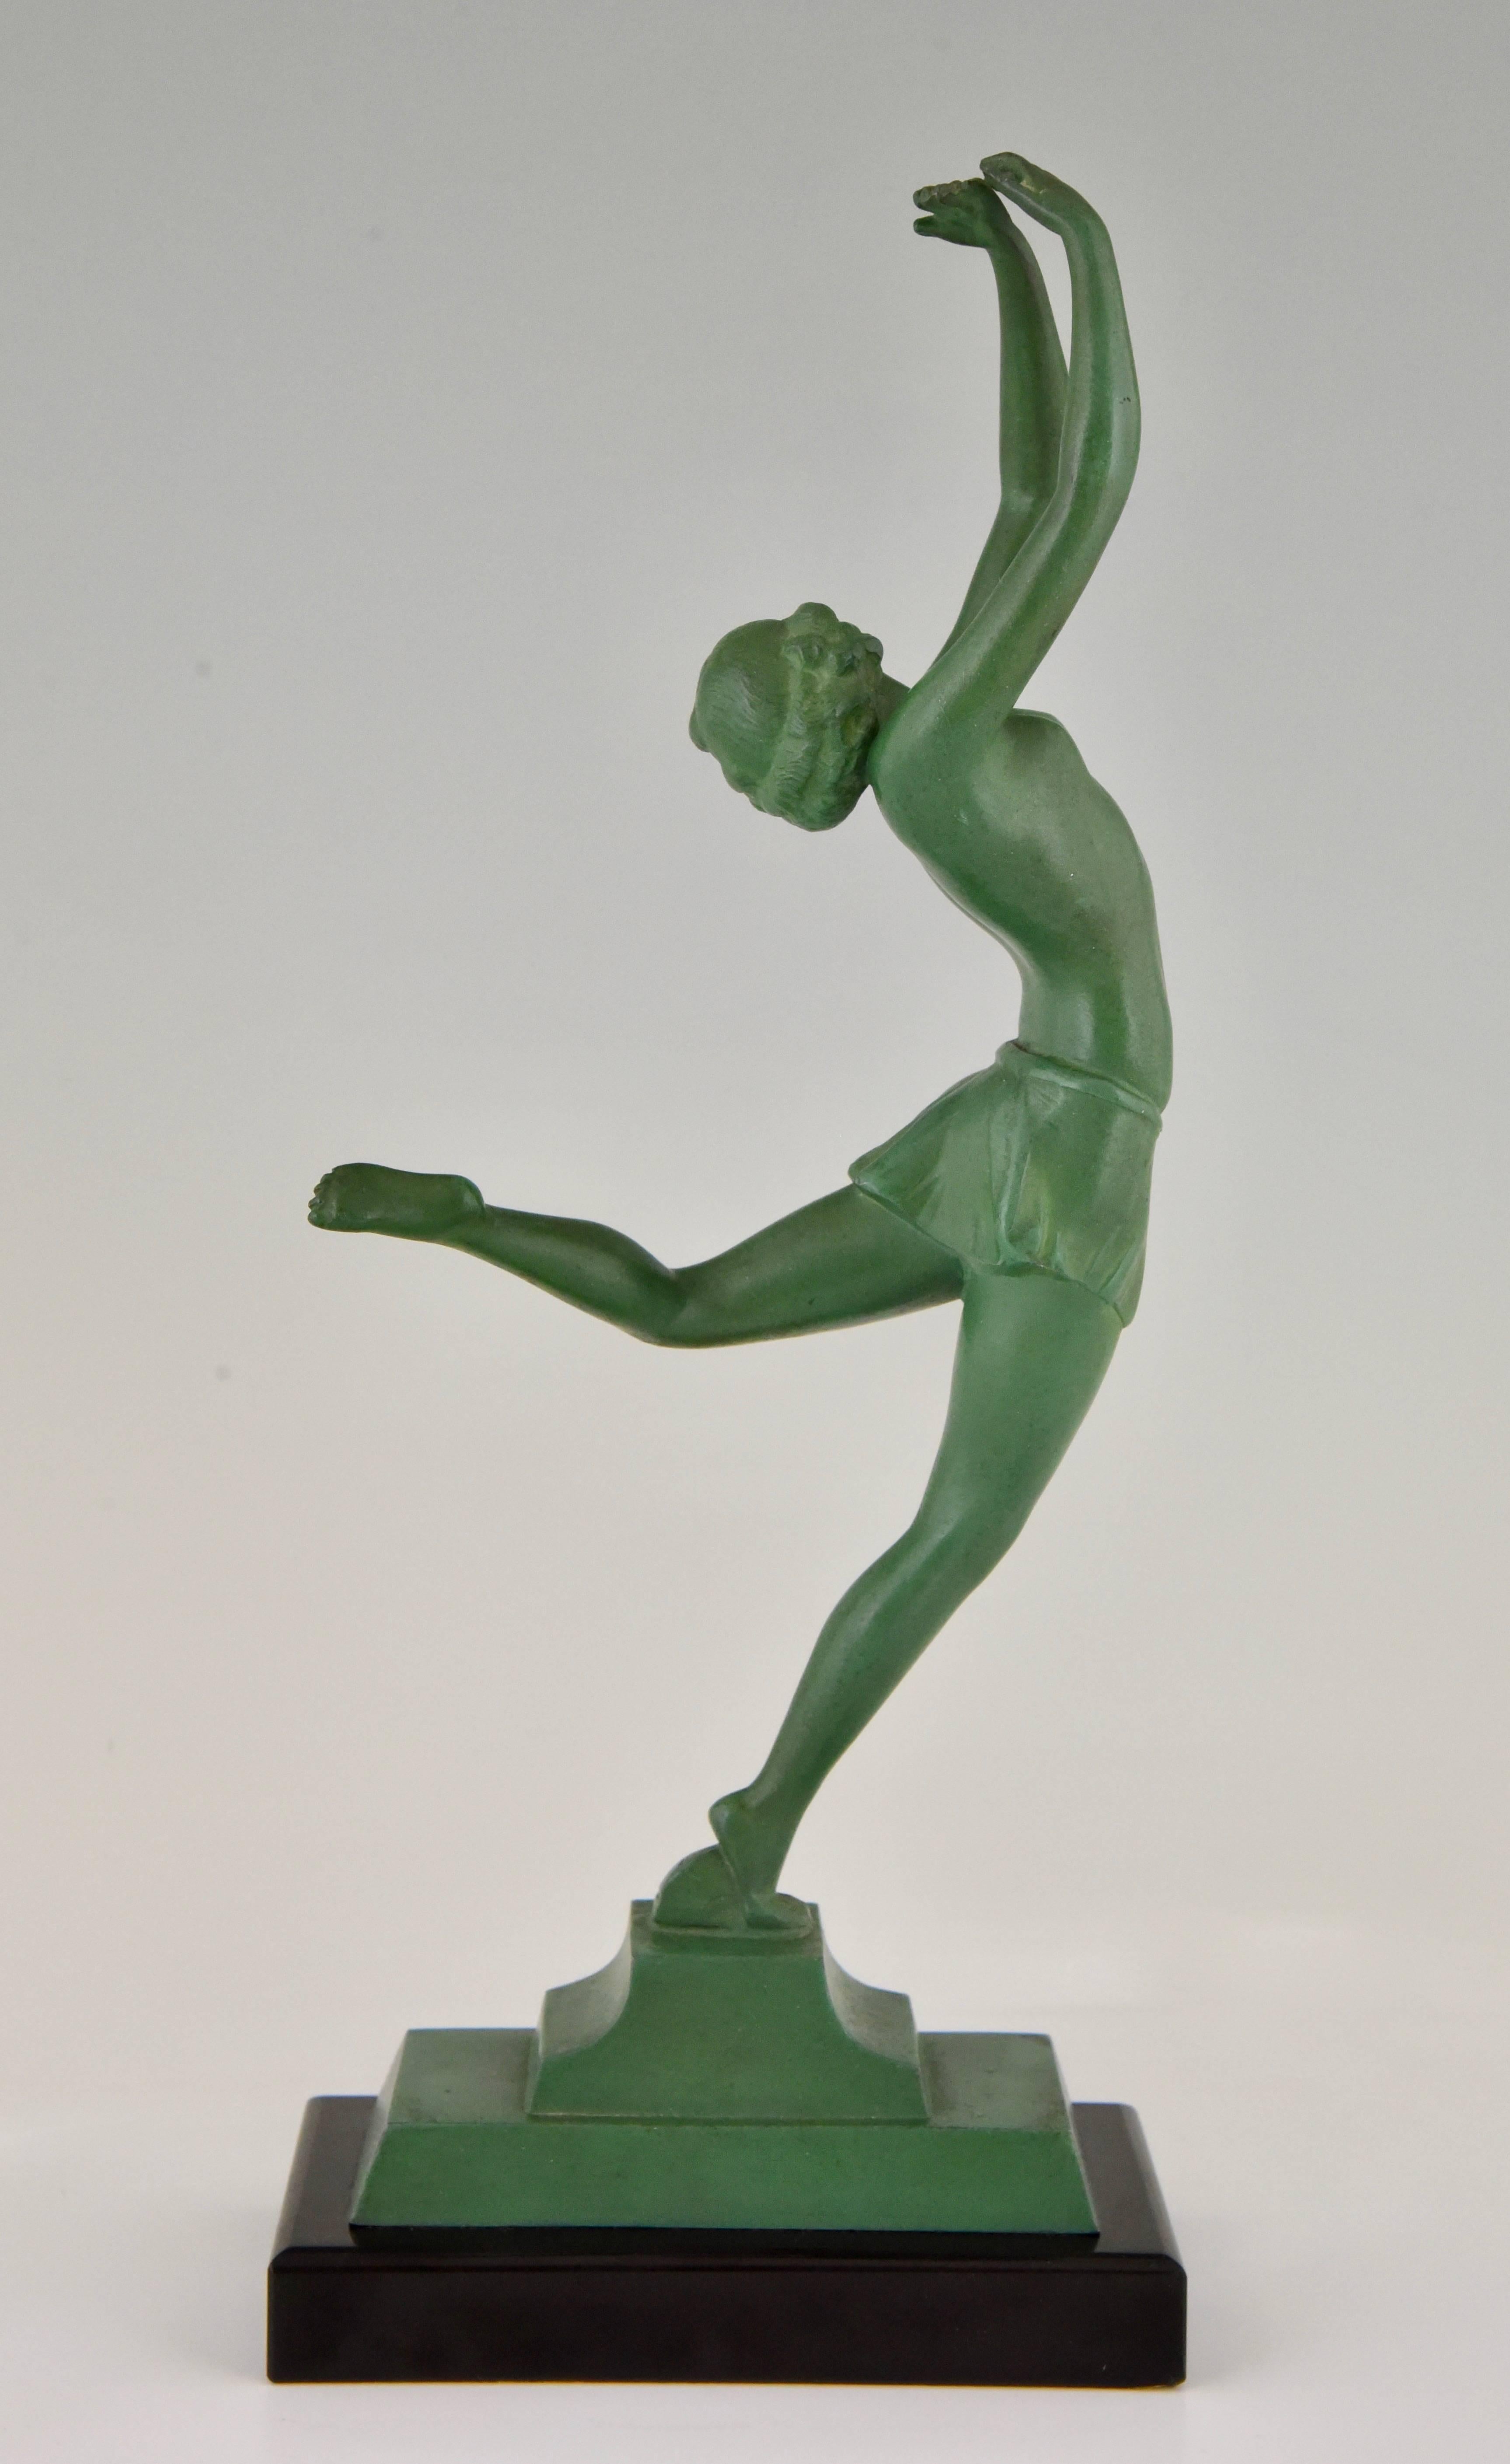 Metal French Art Deco Sculpture of a Dancer on Marble Base, 1930